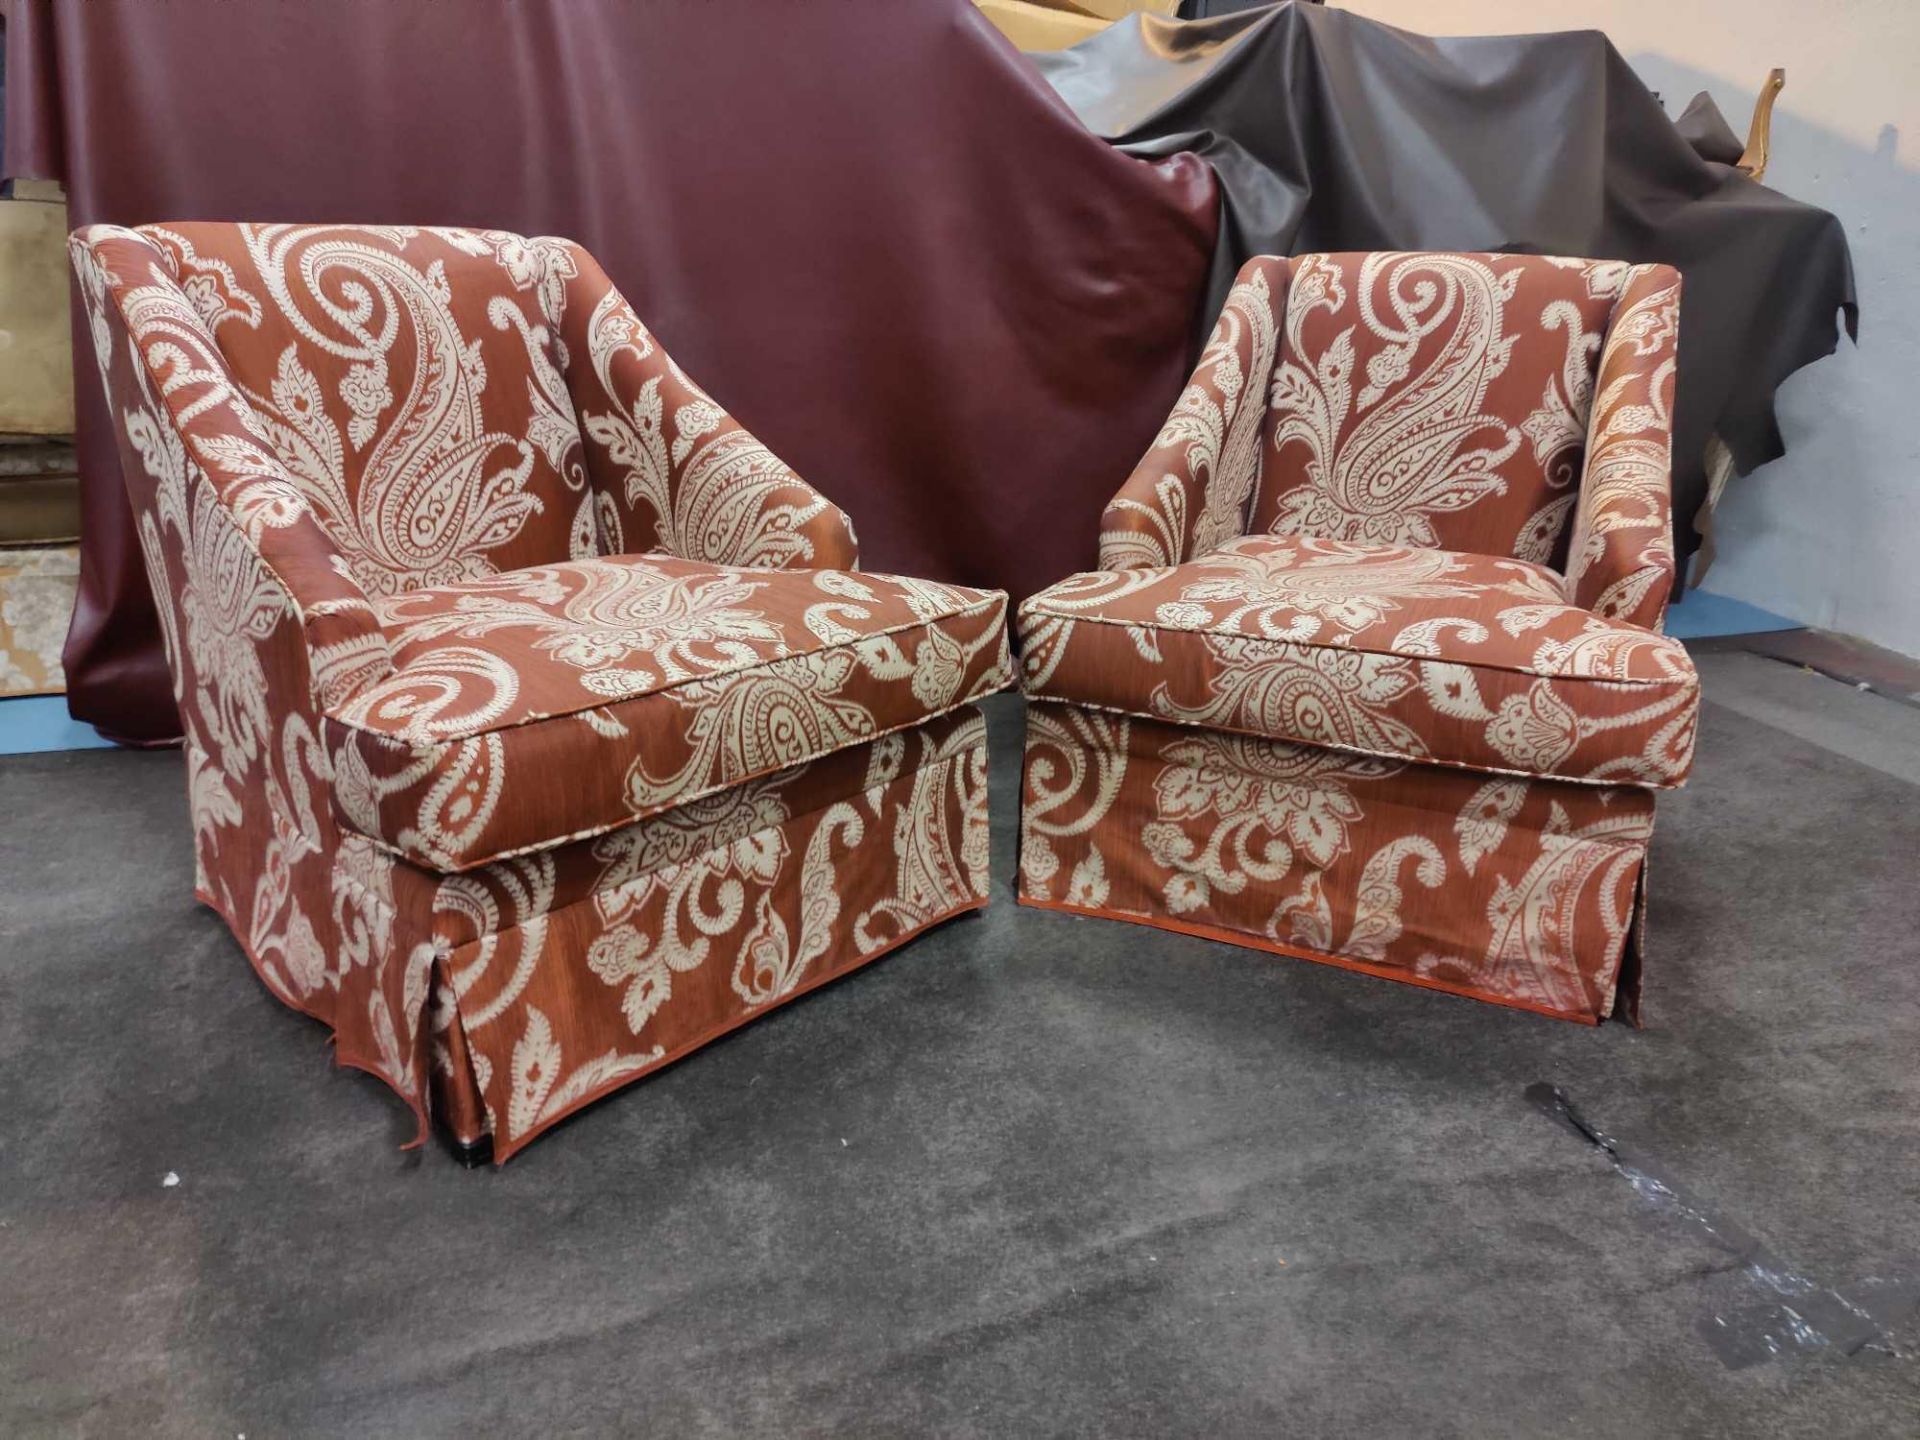 A Pair Of  Dudgeon British Handmade Furniture London Egerton Armchairs Sloping Arms Upholstered In A